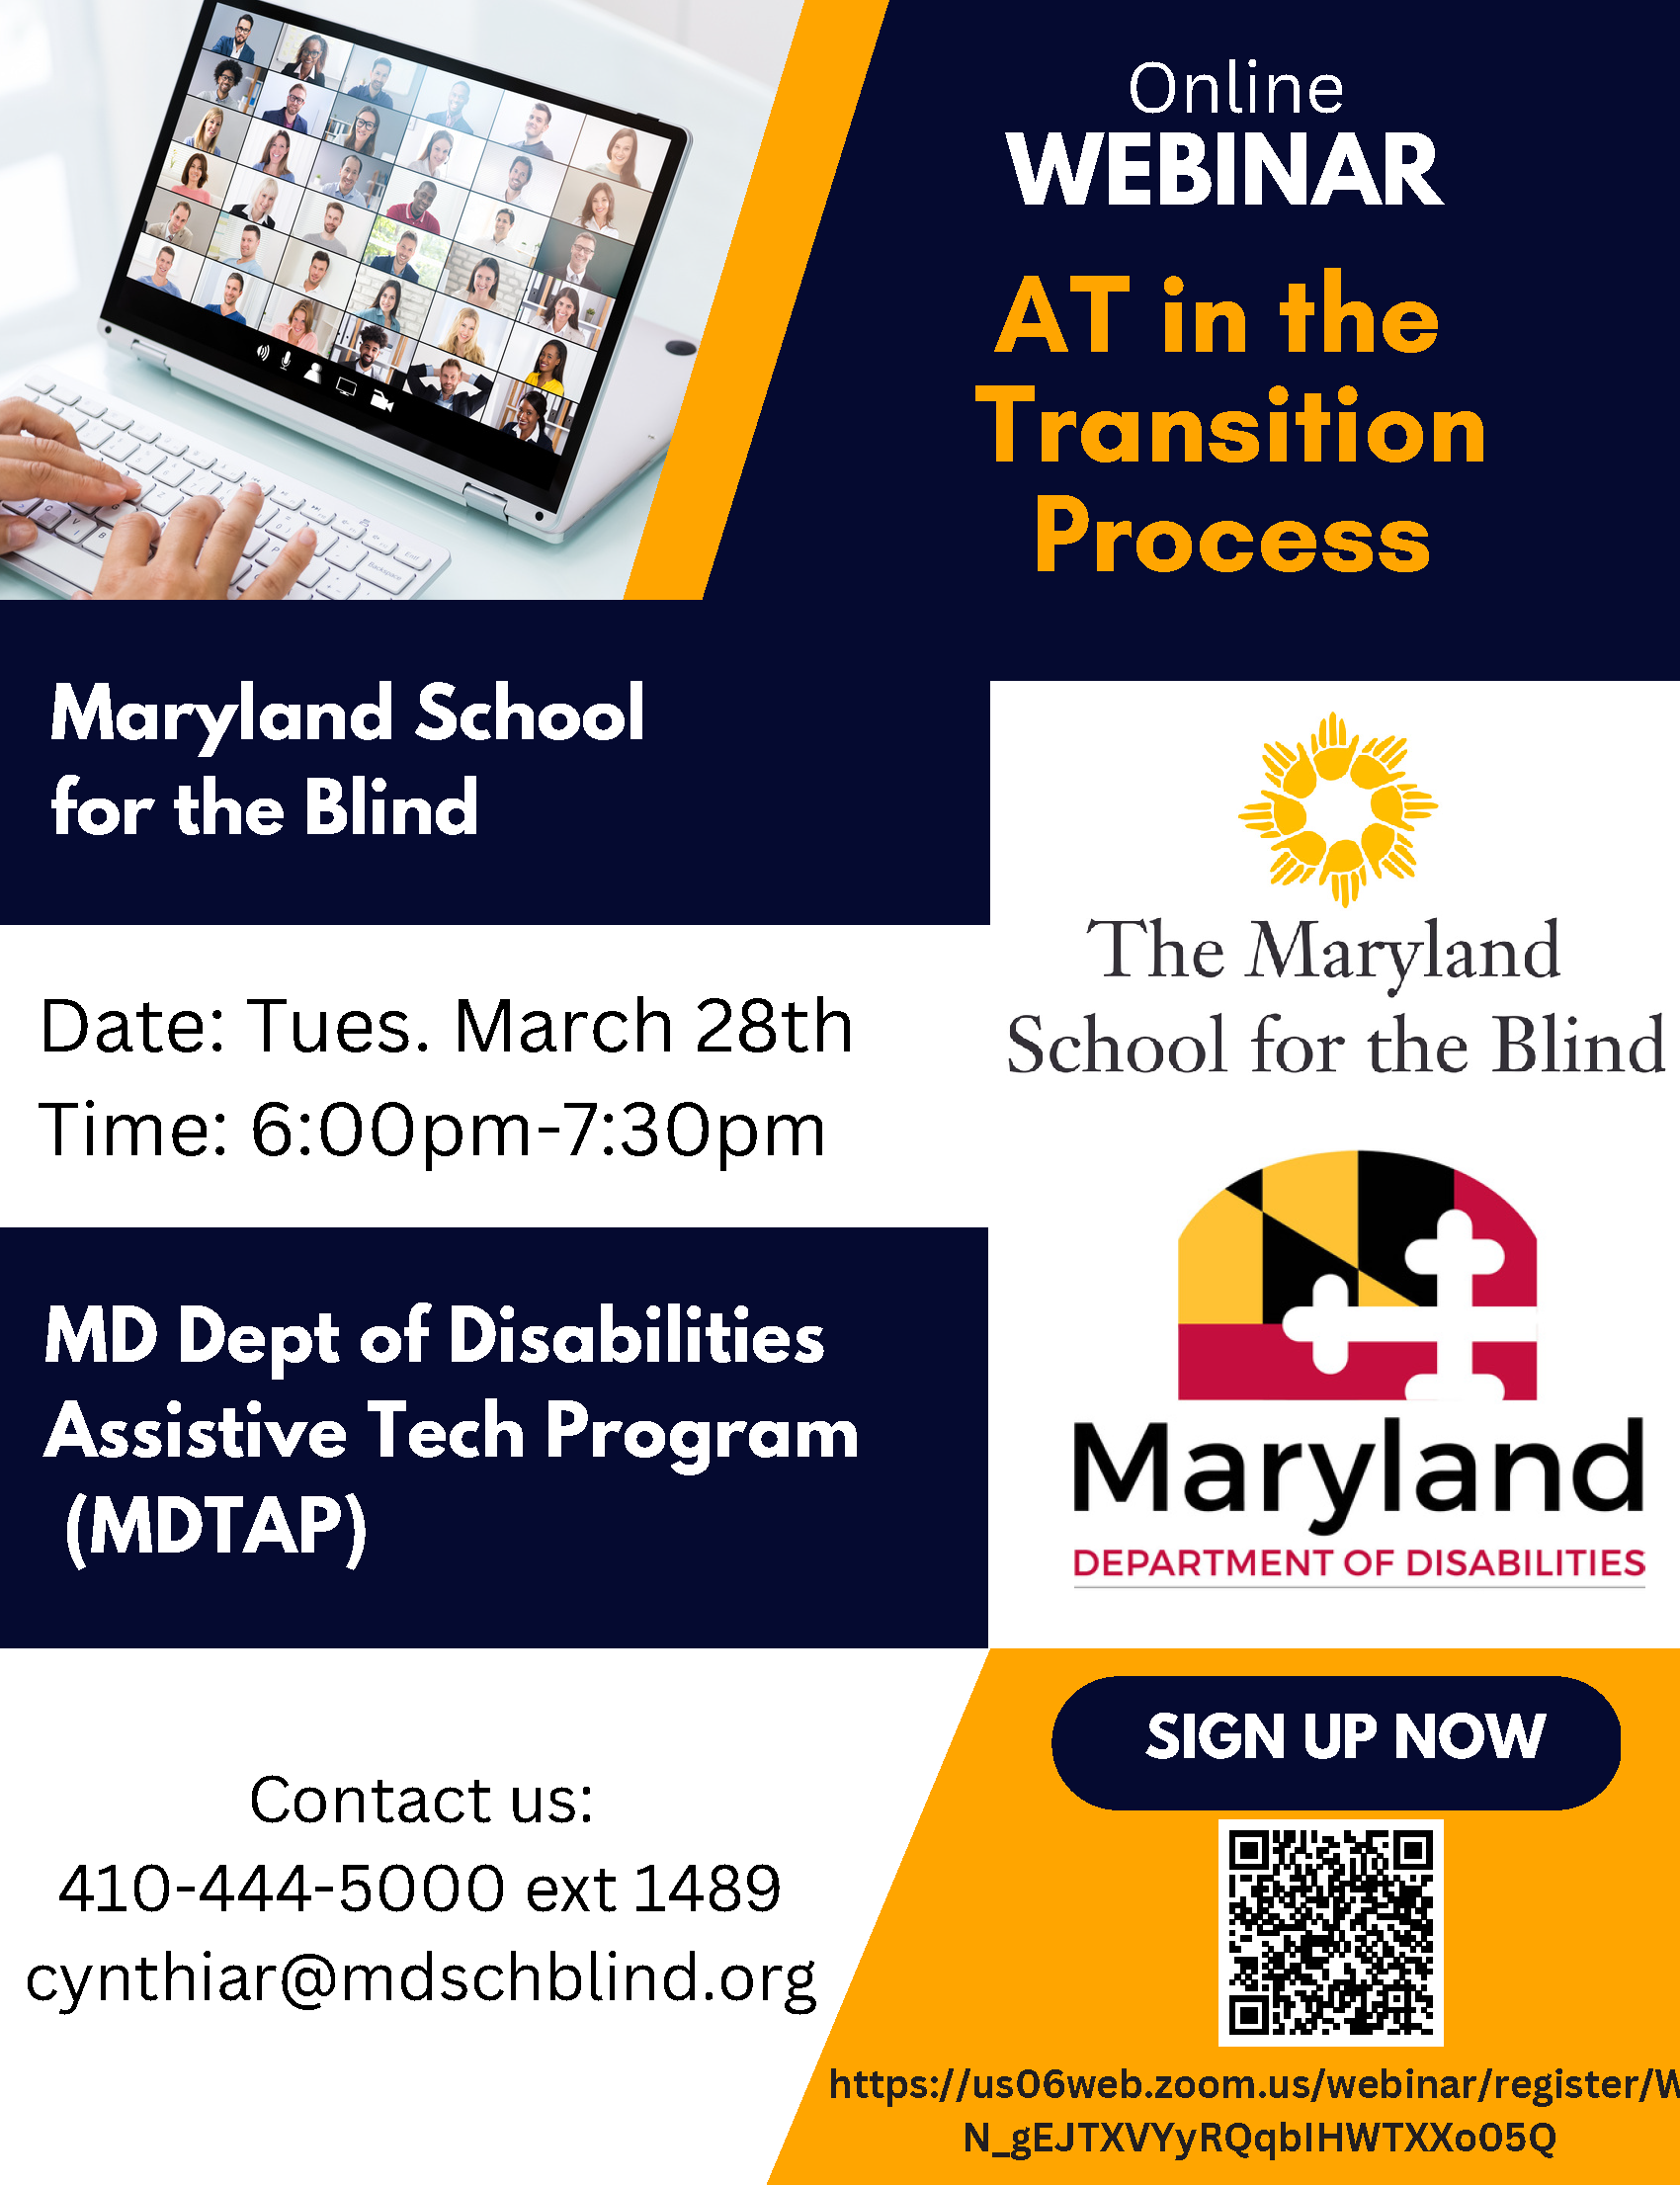 Join the Maryland School for the Blind and the Maryland Department of Disabilities Assistive Technology Program as we explore services &amp; programs providing access to assistive technology (AT) during &amp; after the transition from school to the community! Learn about the many AT services available through the Maryland AT Program. Questions? Contact Cynthia at cynthiar@mdschblind.org To register, use the zoom link provided below or the QR code on the flyer.